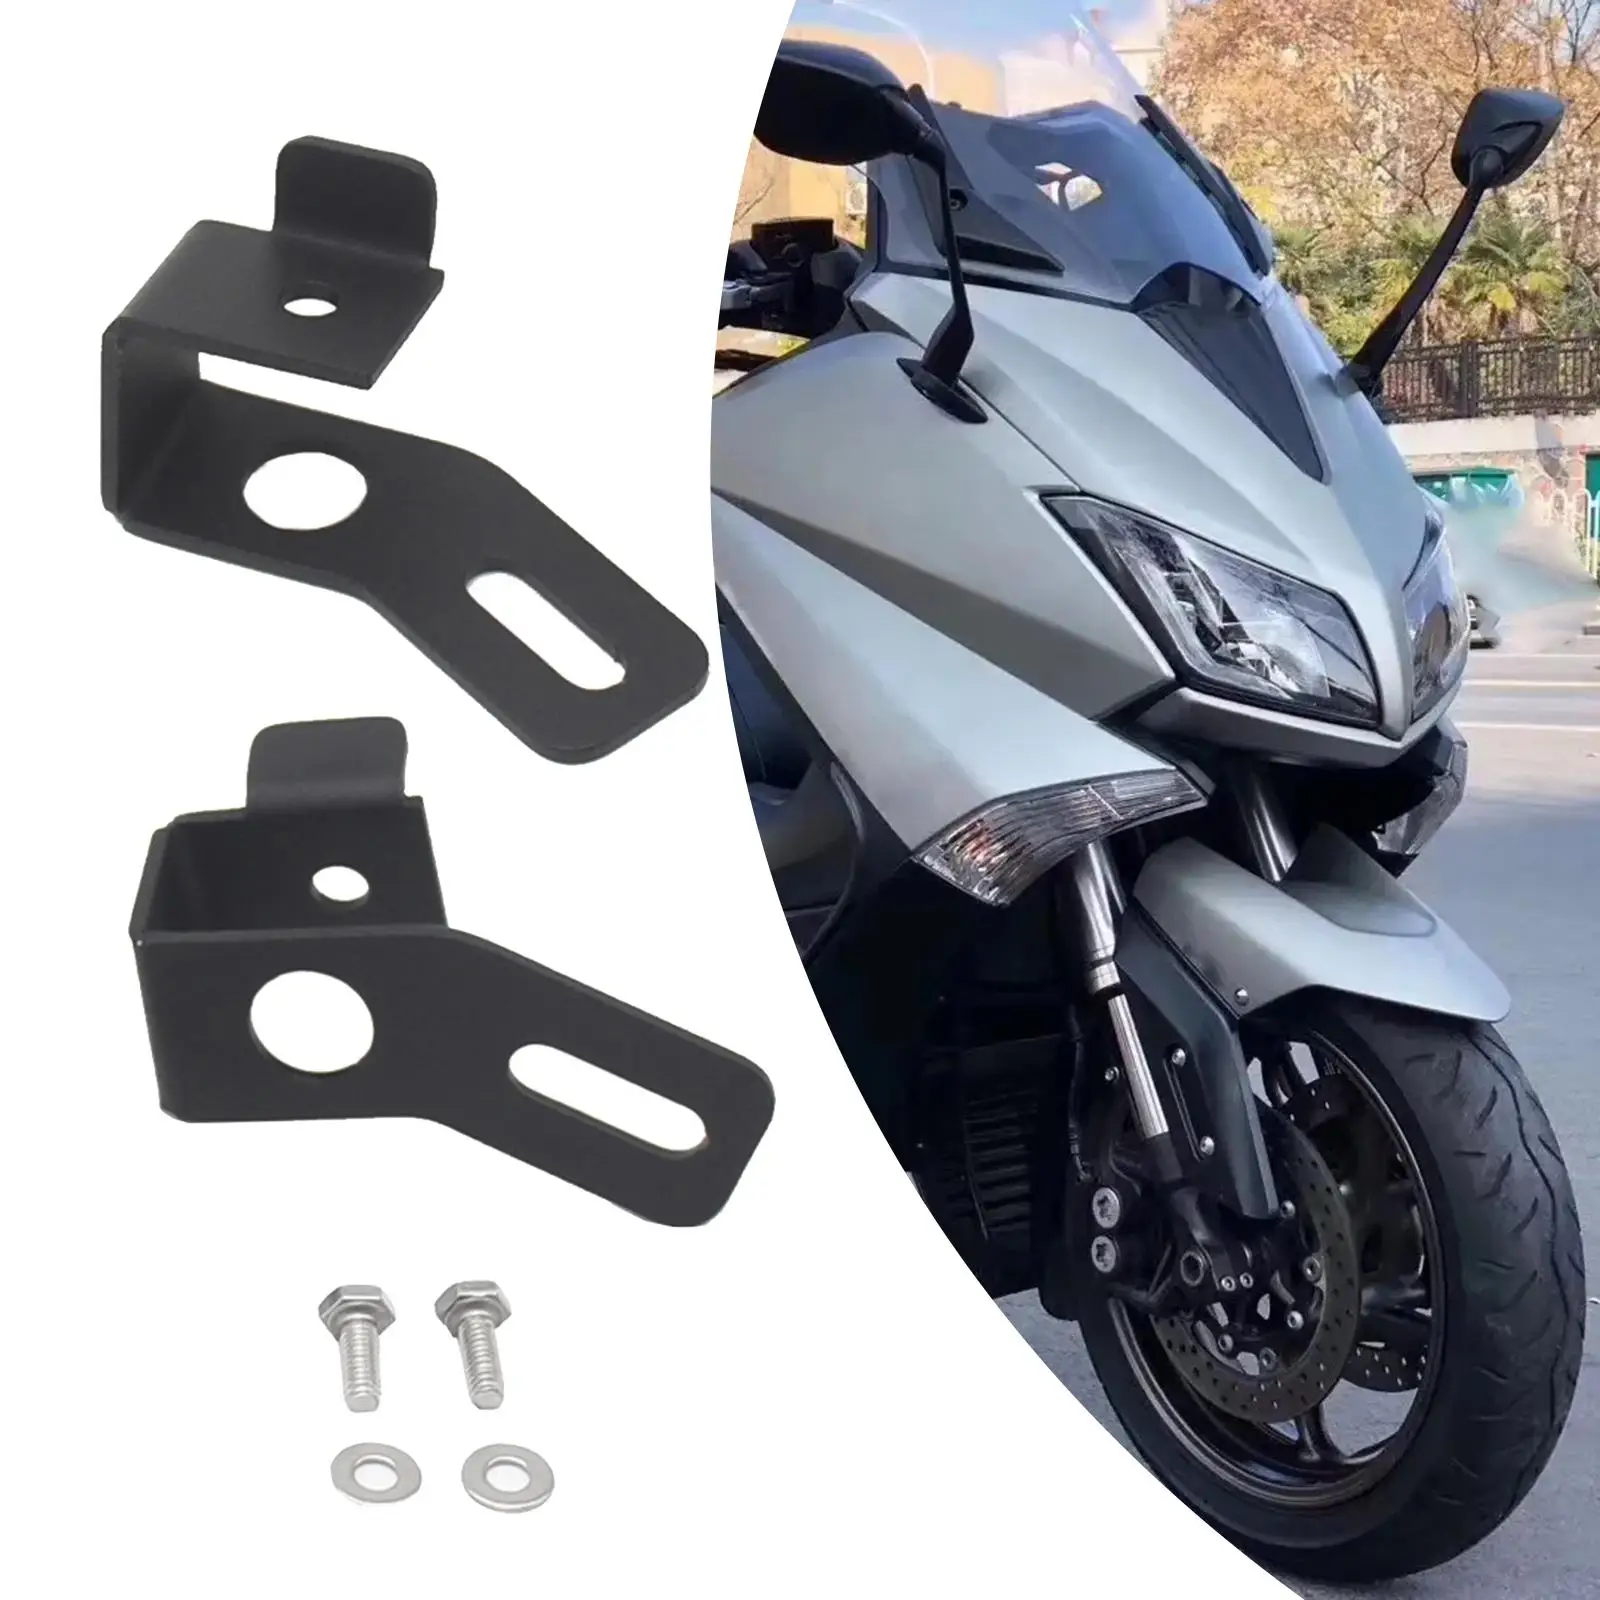 Fog Lamp Spot Lamp Auxiliary Support Parts Durable Direct Replaces Autobicycle for Yamaha Tmax 560 Tmax 530 2017 - 2021